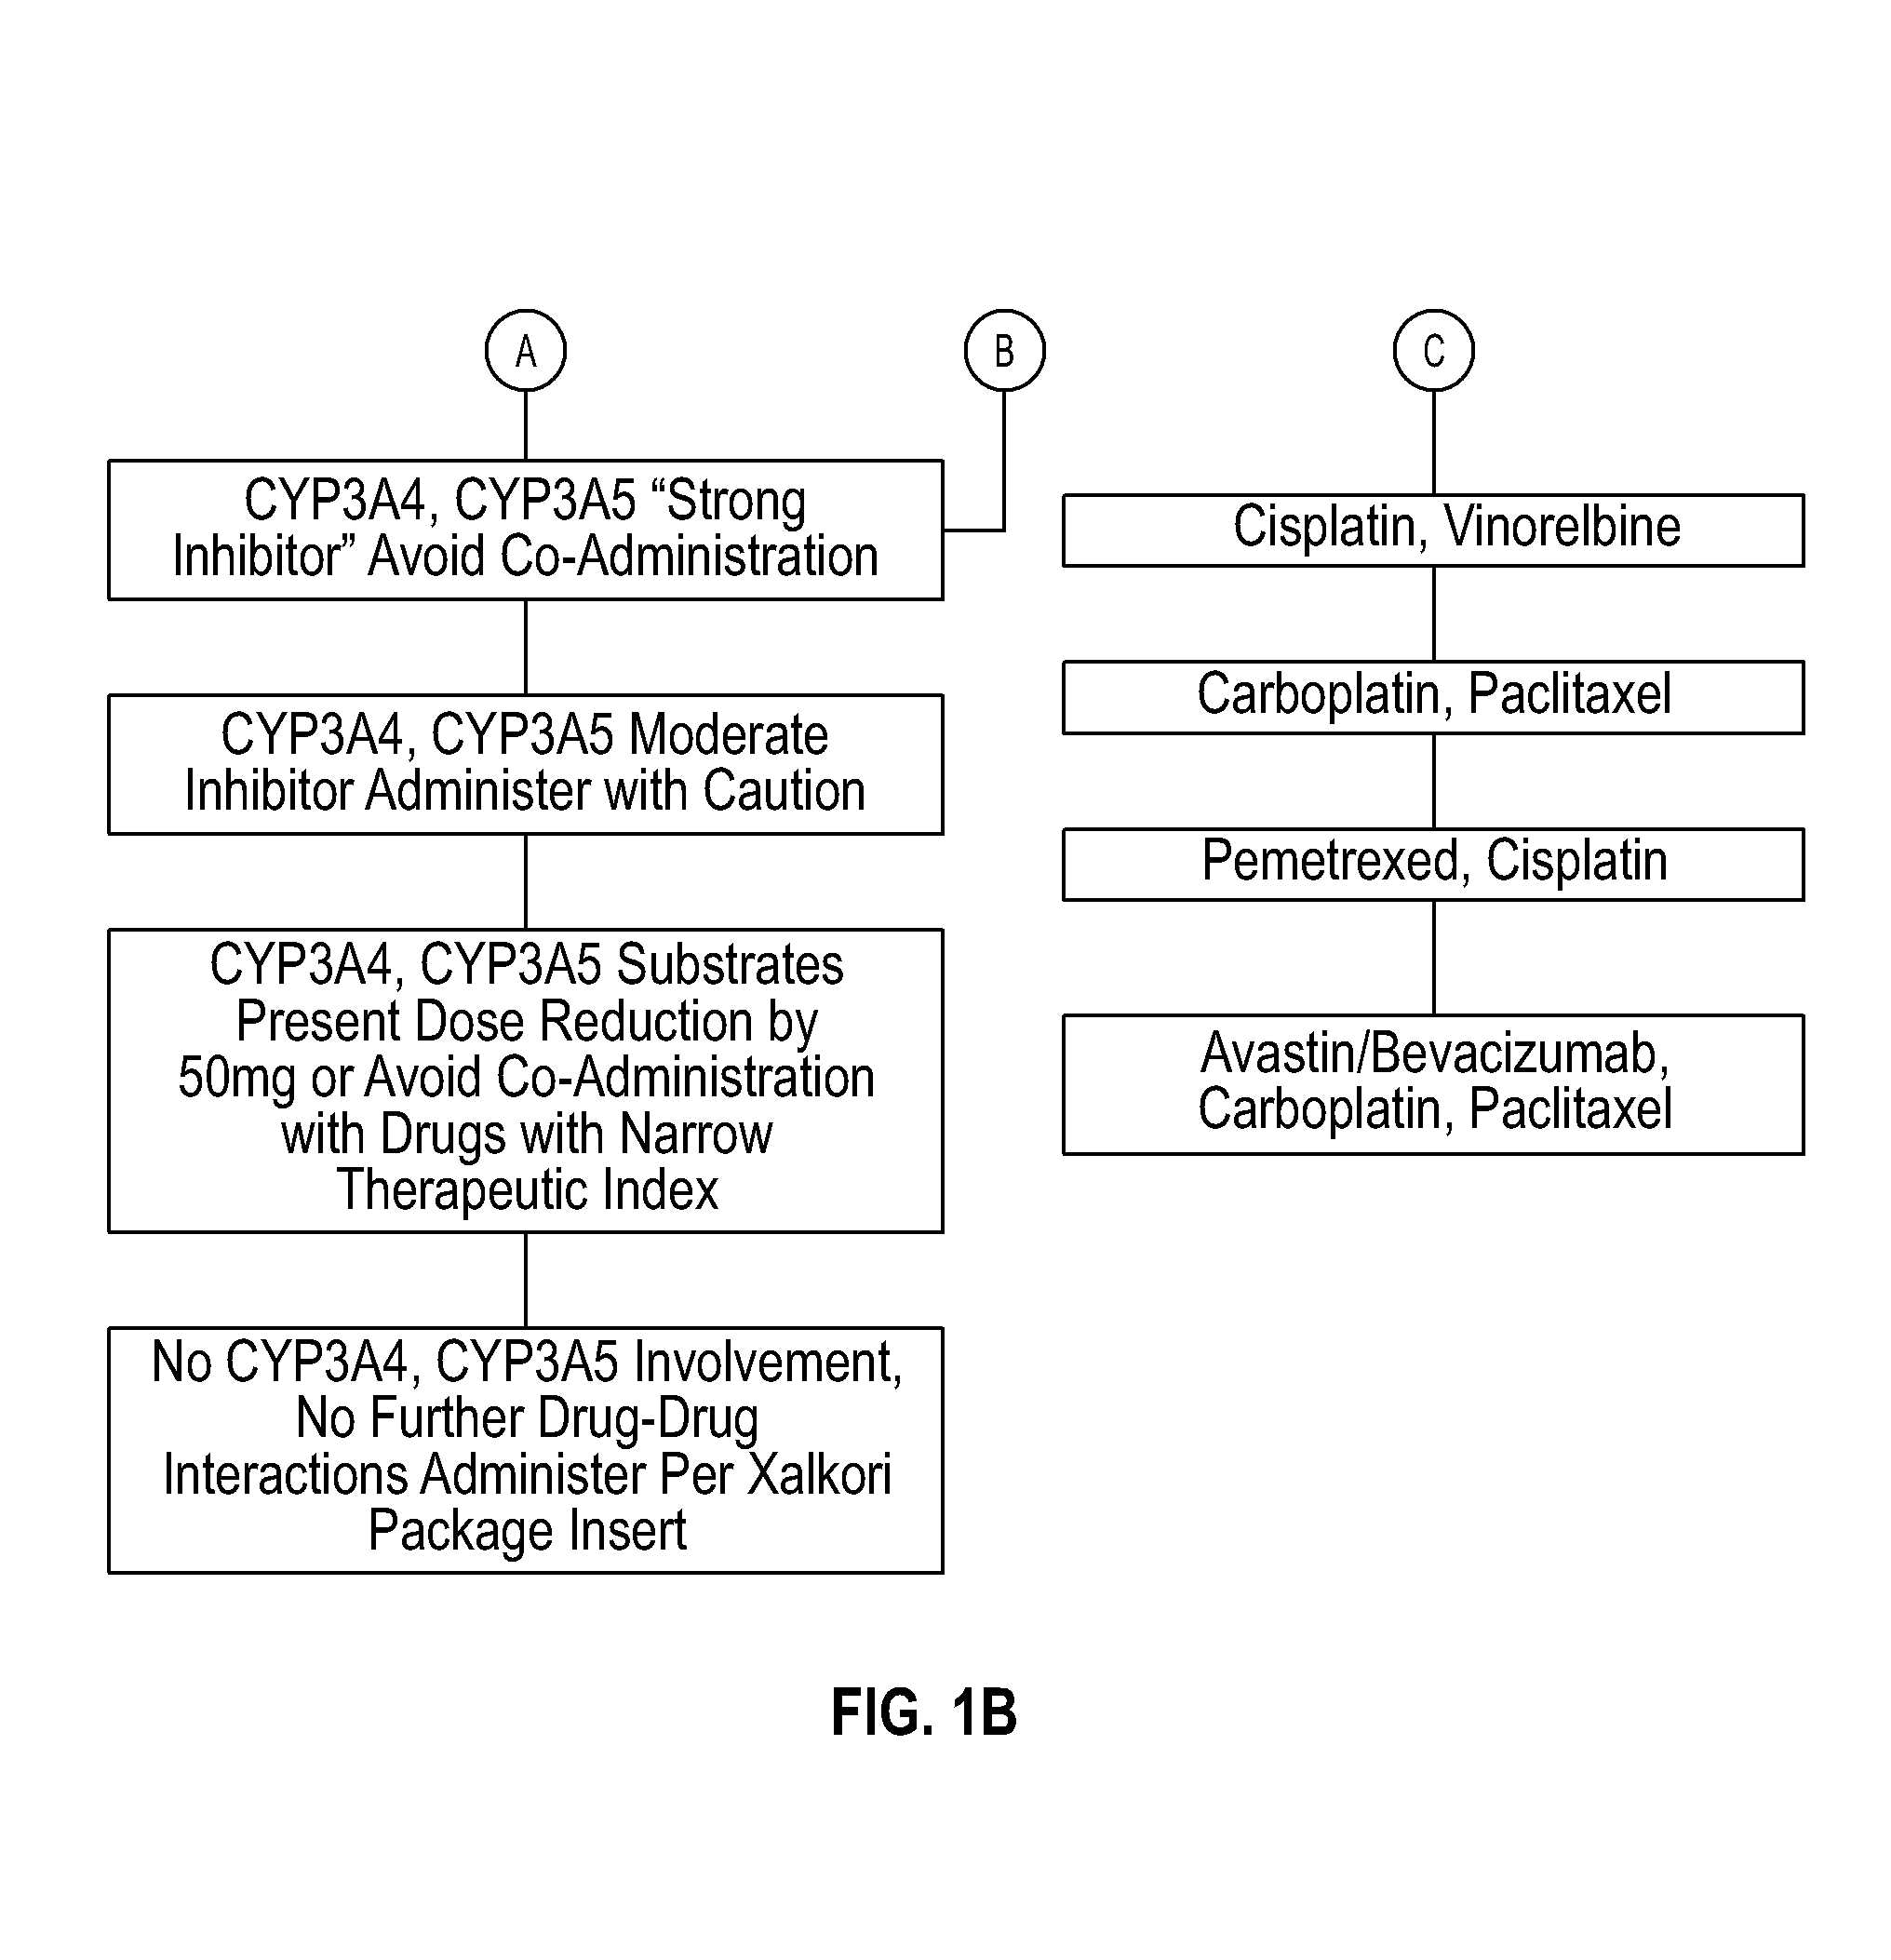 Systems and methods for optimizing drug therapies